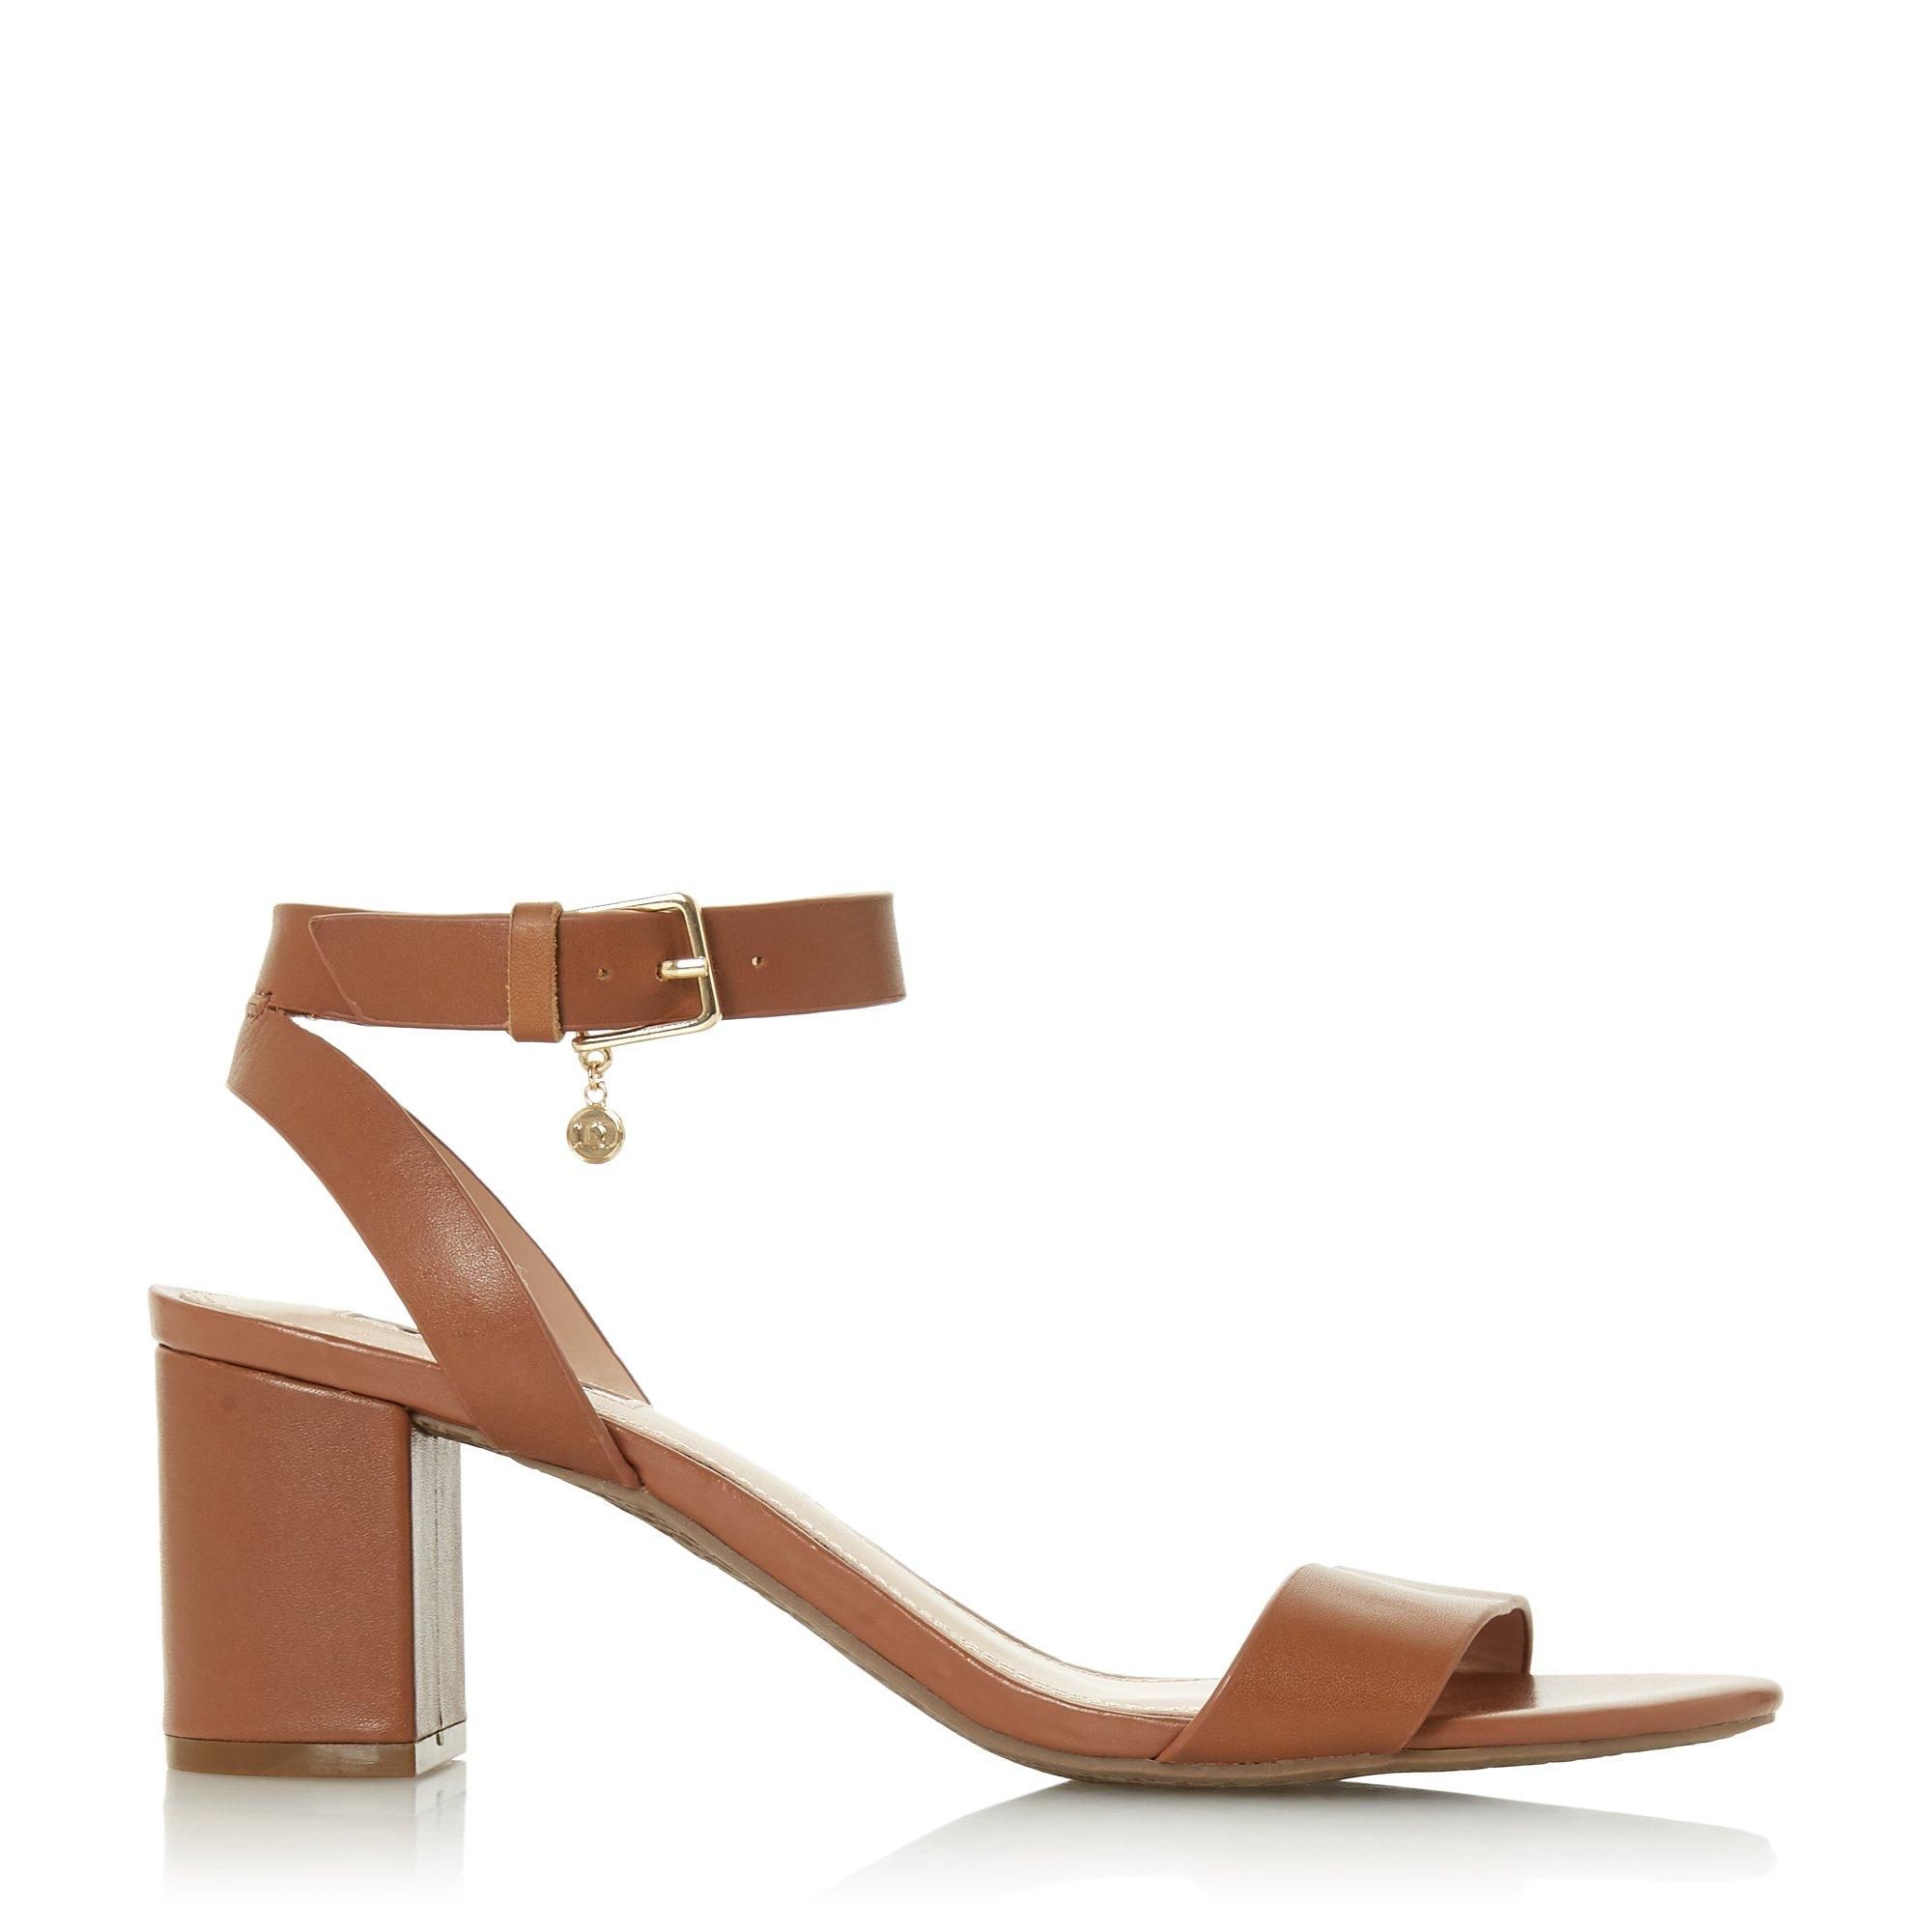 Embolden your favourite edits with this chic sandal. Fitted with a slender buckled ankle strap with a delicate chain. It rests on a contrasting mid block heel.